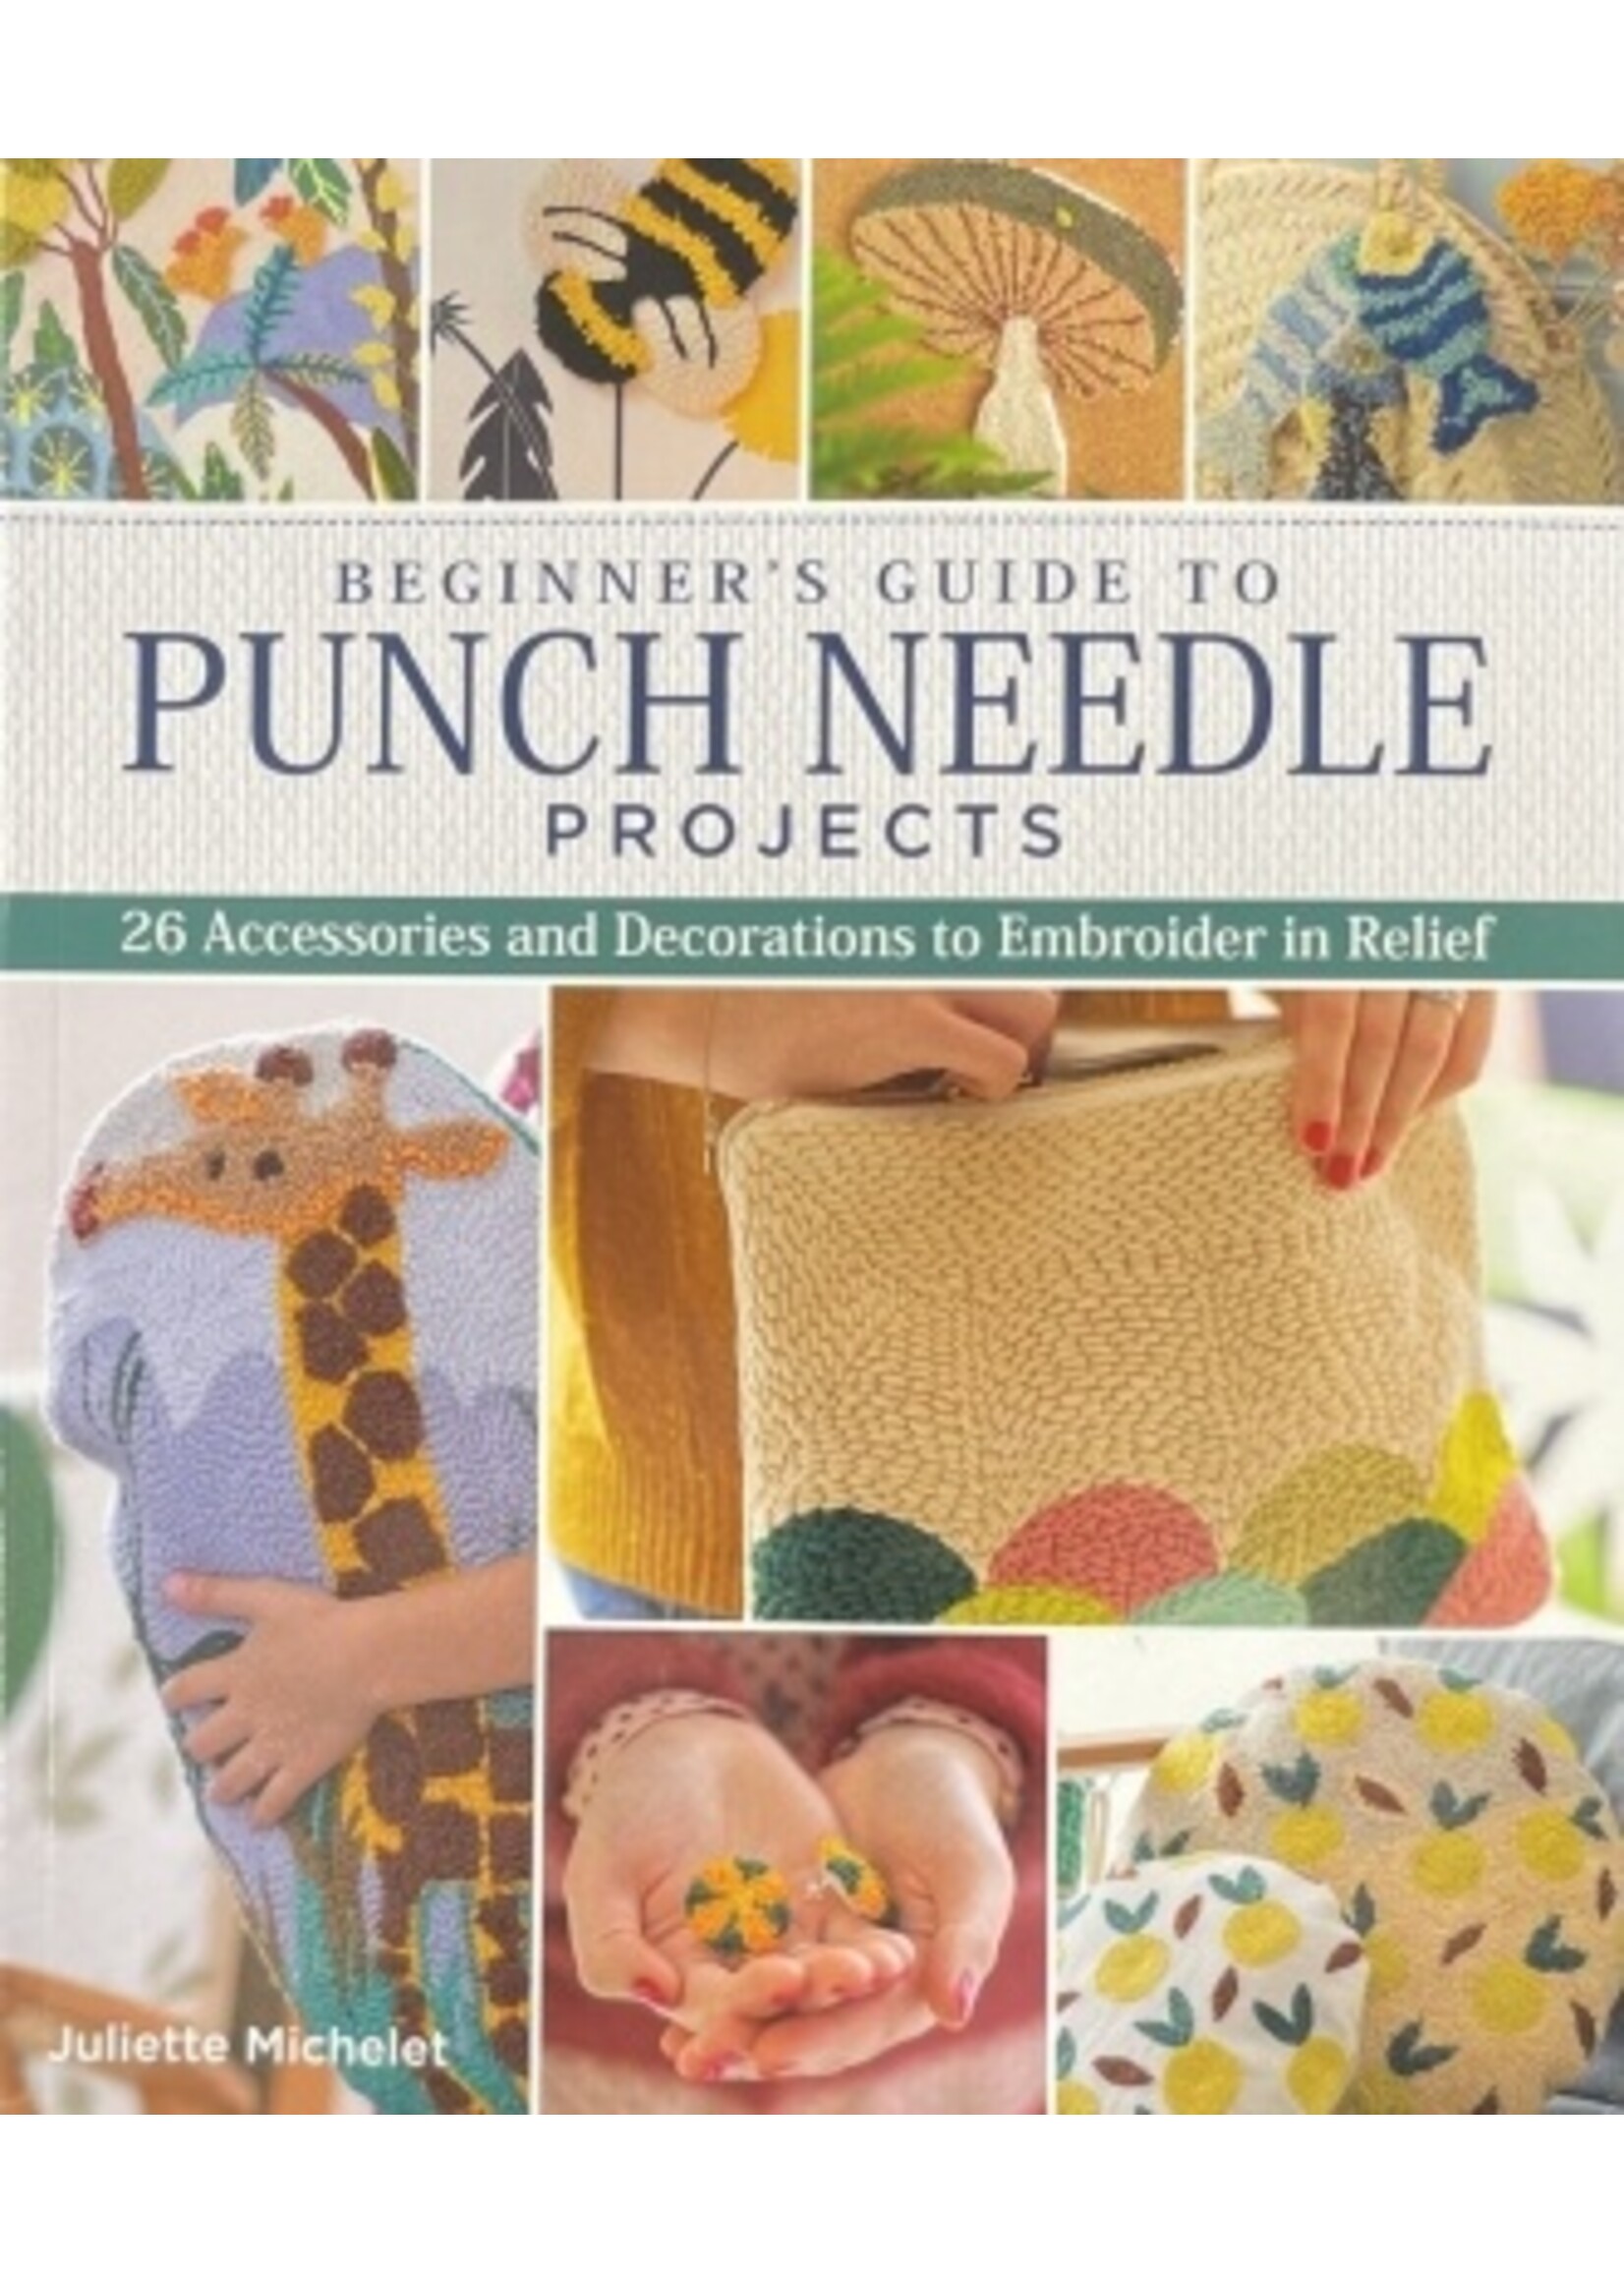 Bryson Beginner’s Guide to Punch Needle Projects